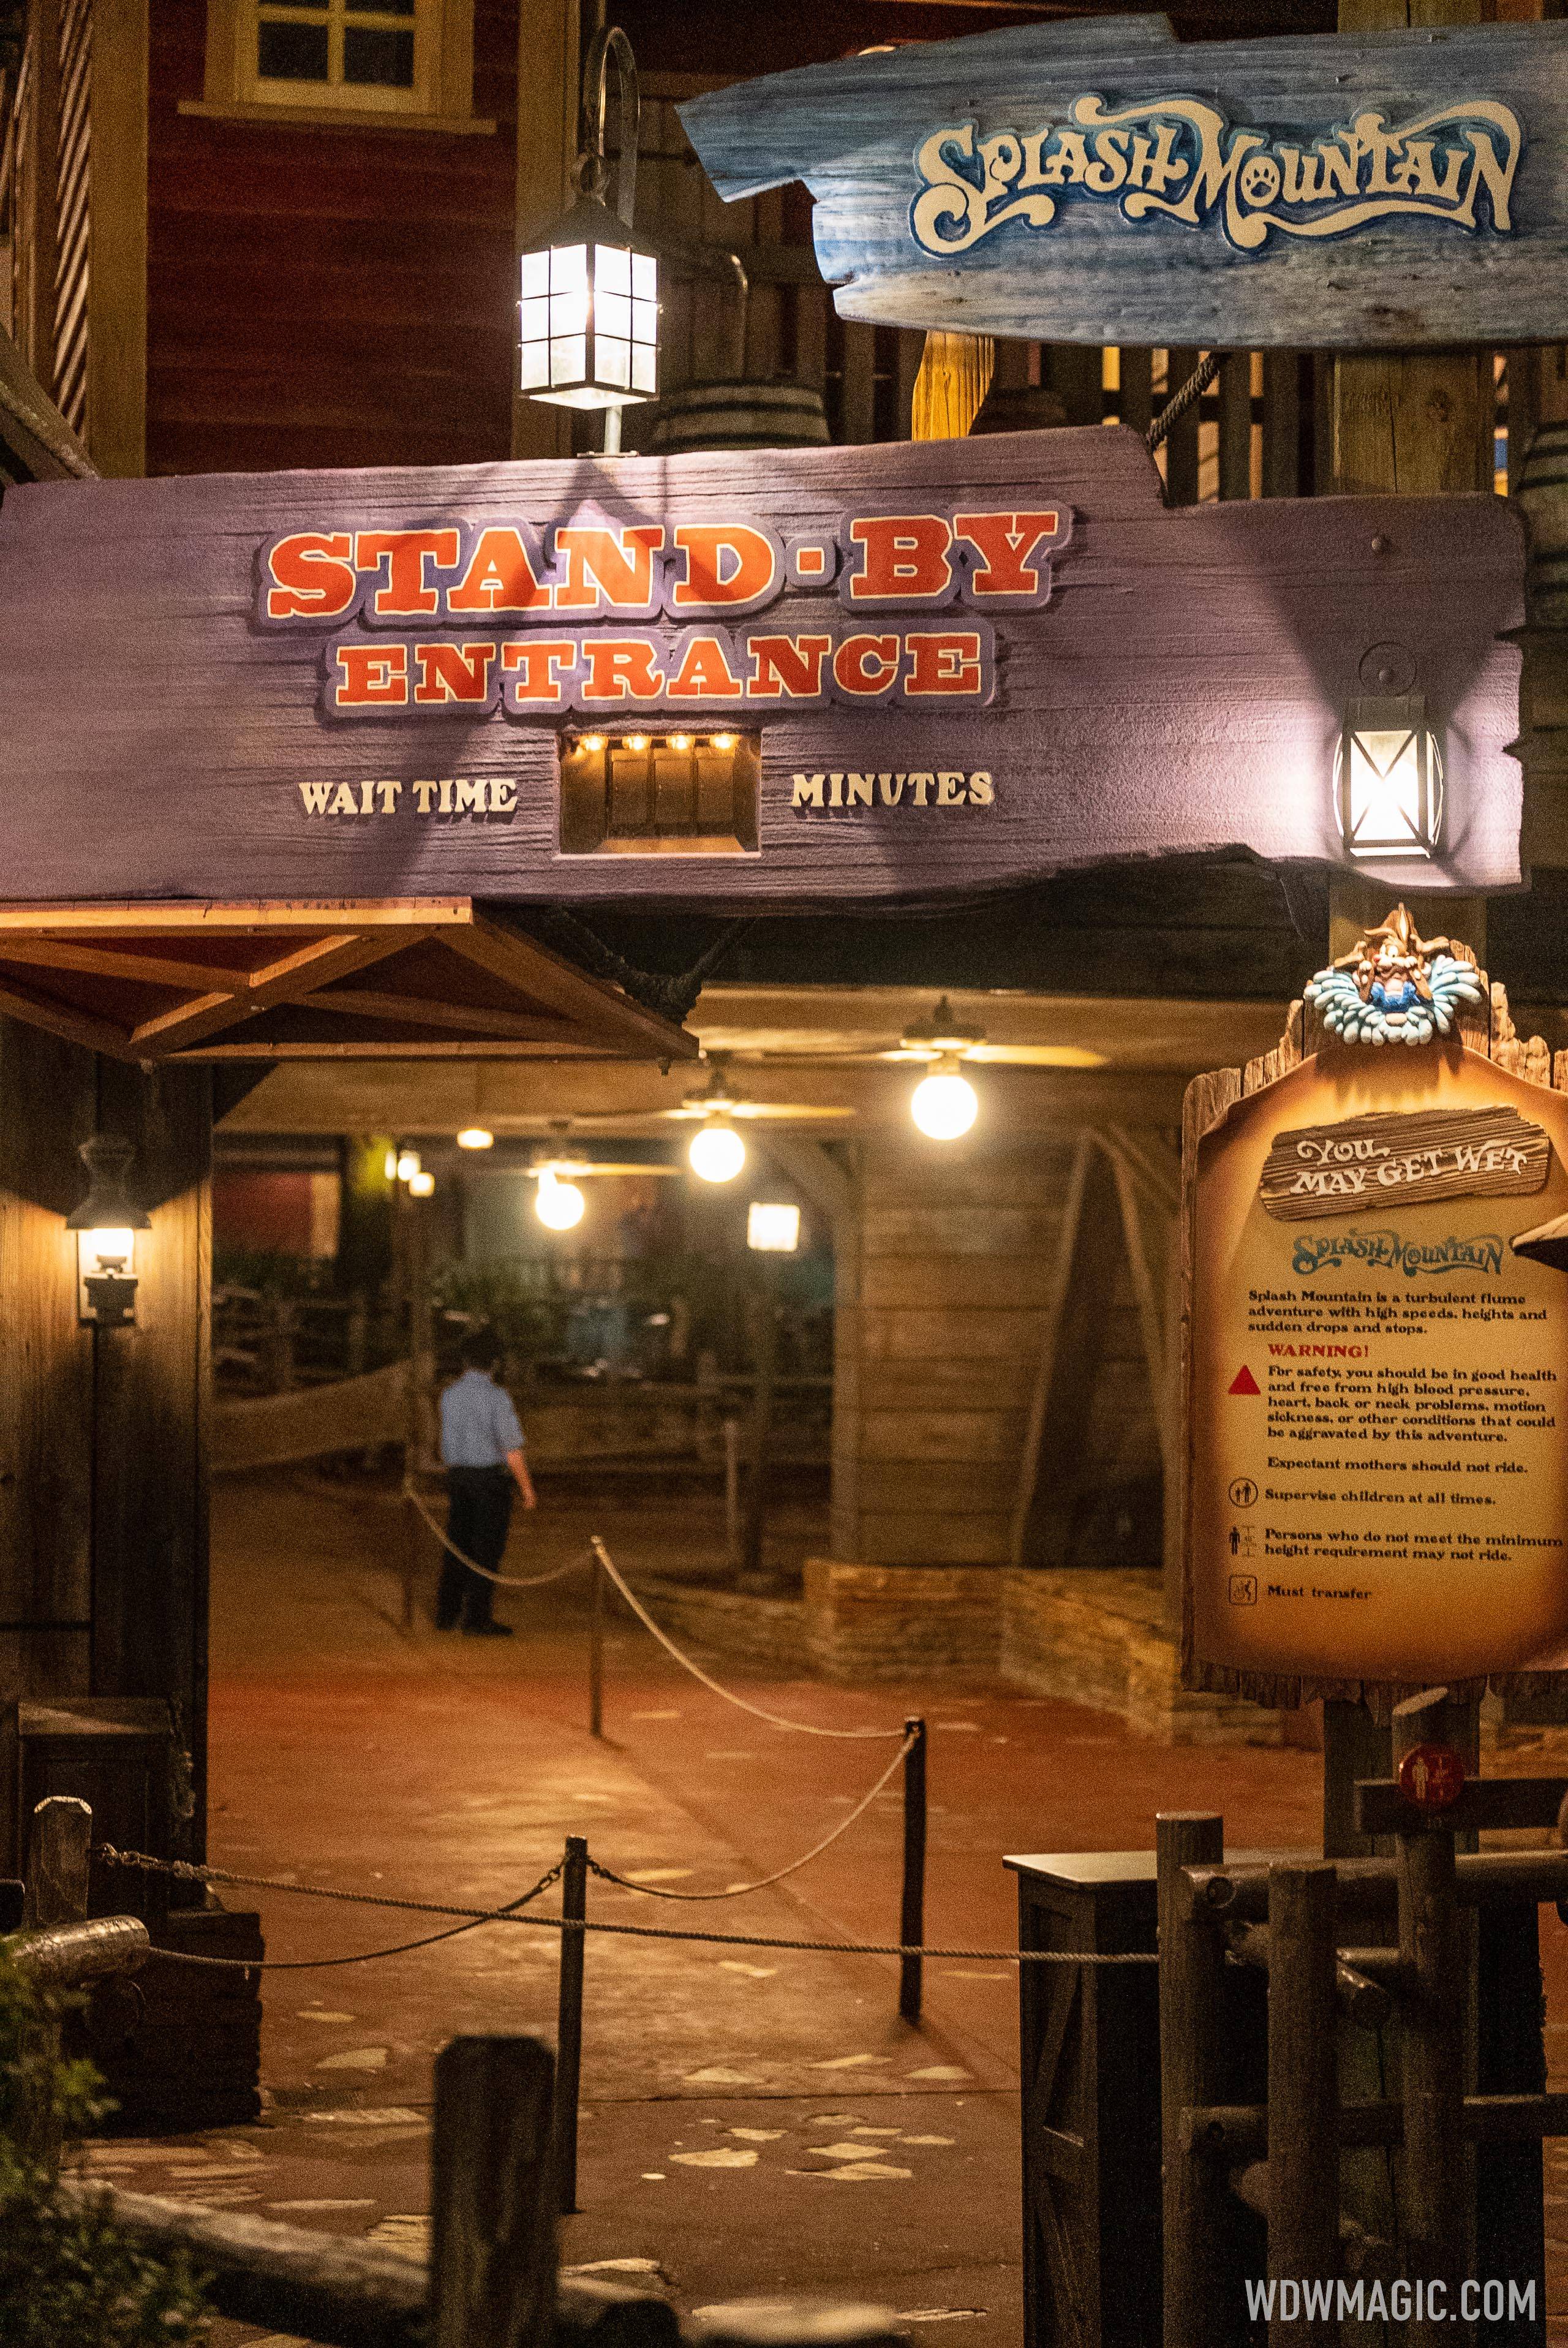 The Splash Mountain queue is roped-off and permanently closed.